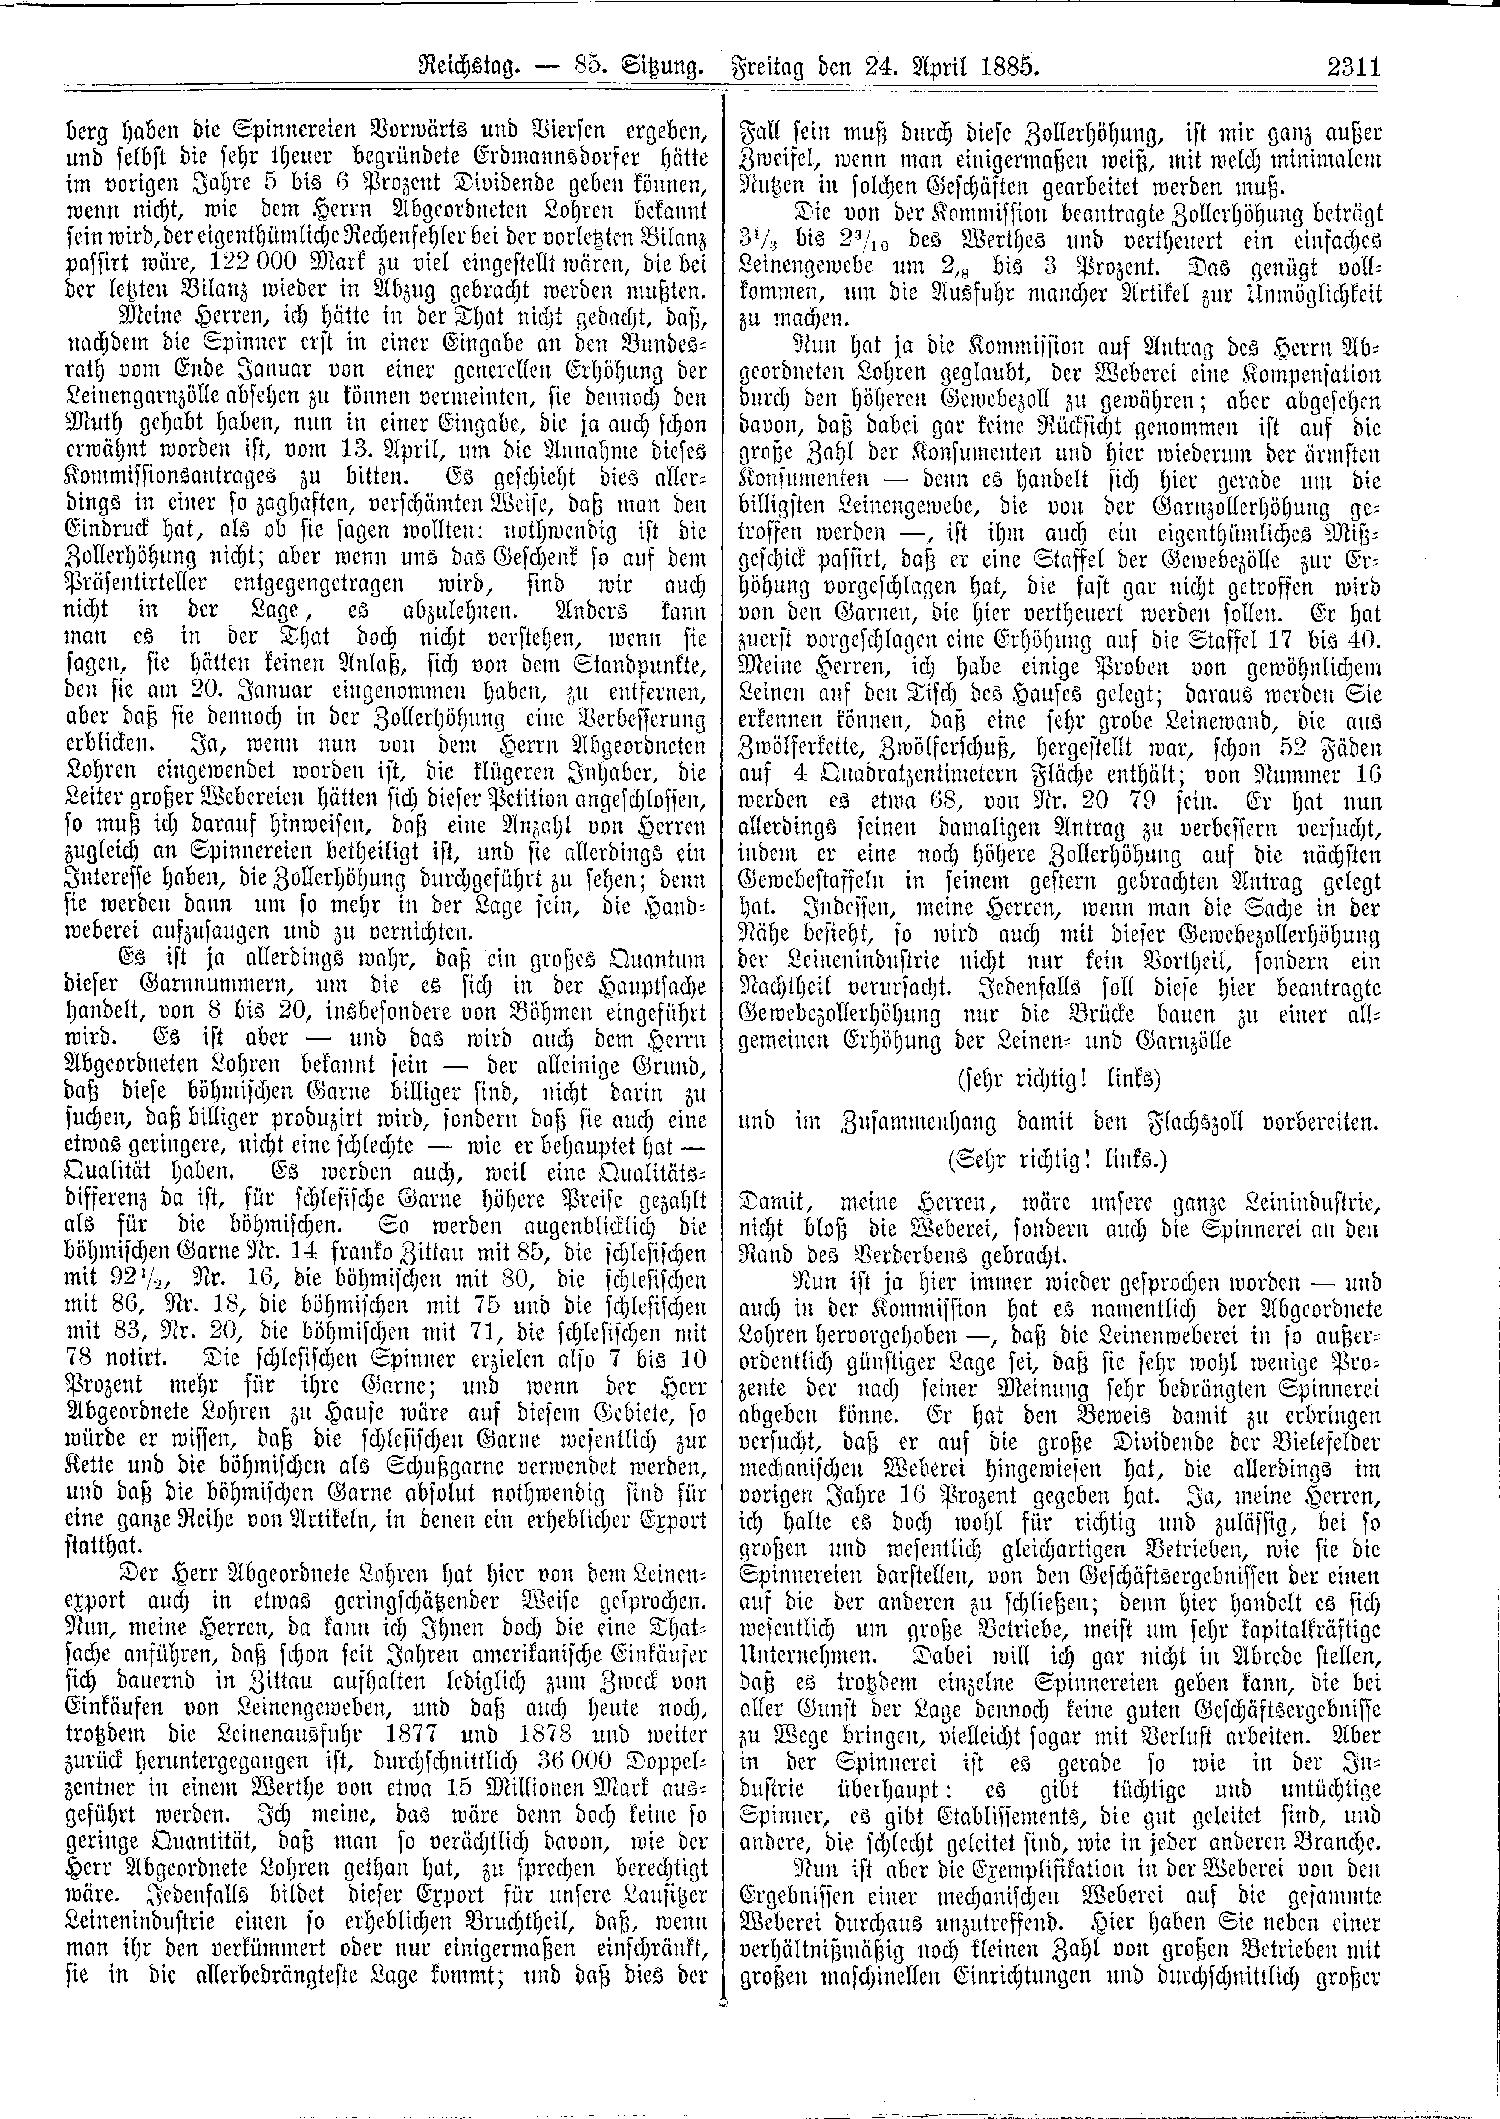 Scan of page 2311